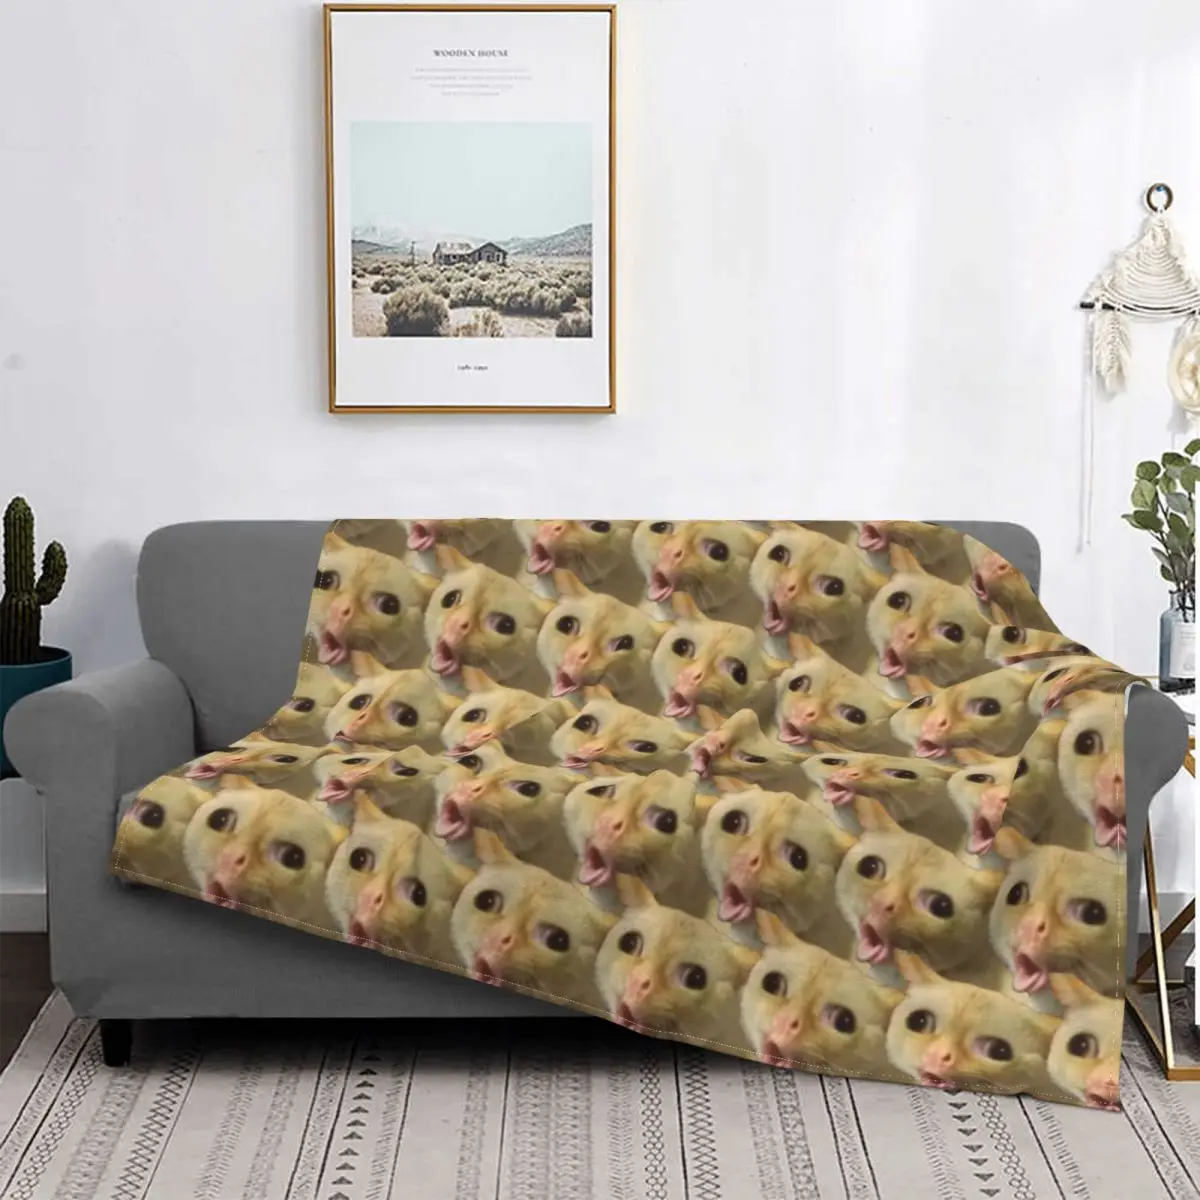 

Cat Coughing Like A Kid Meme Pattern Blanket Flannel Funny Warm Throw Blanket for Home Restaurant Decoration